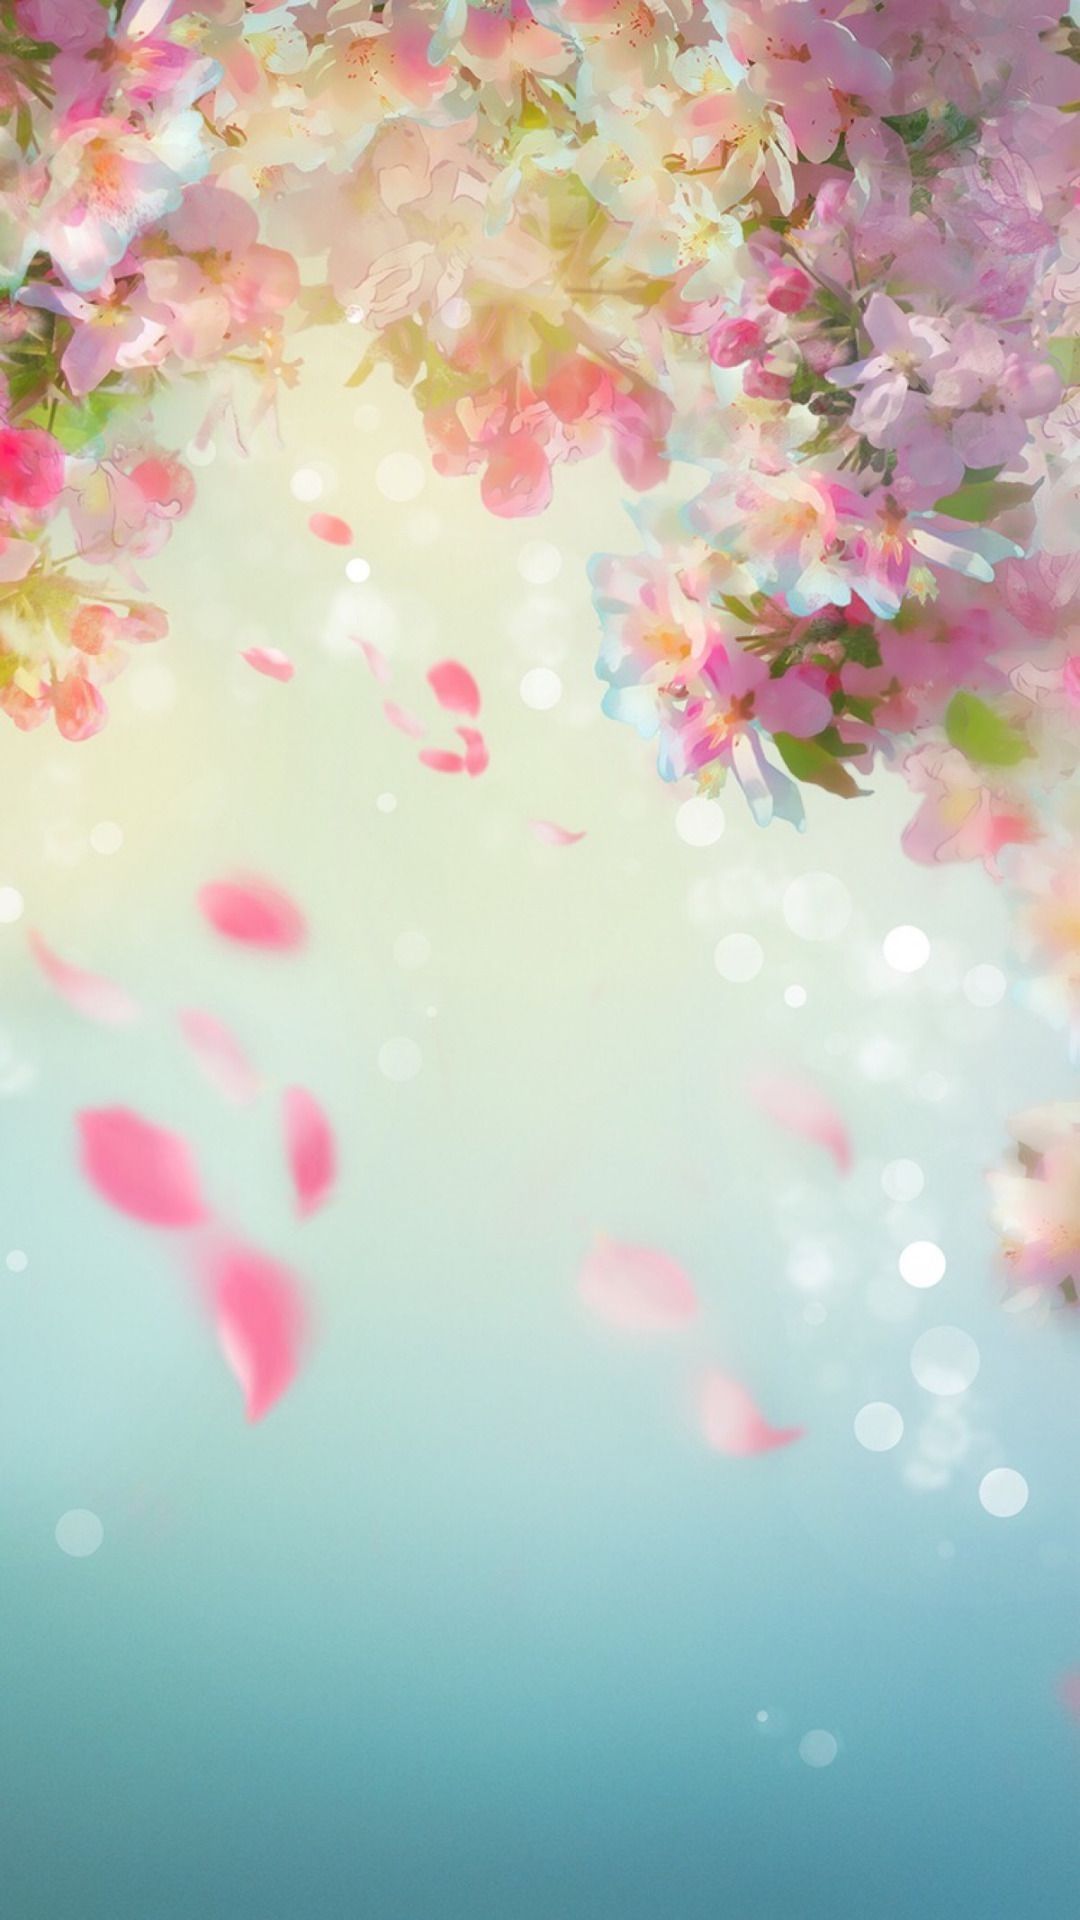 A beautiful pink and white flower background - Spring